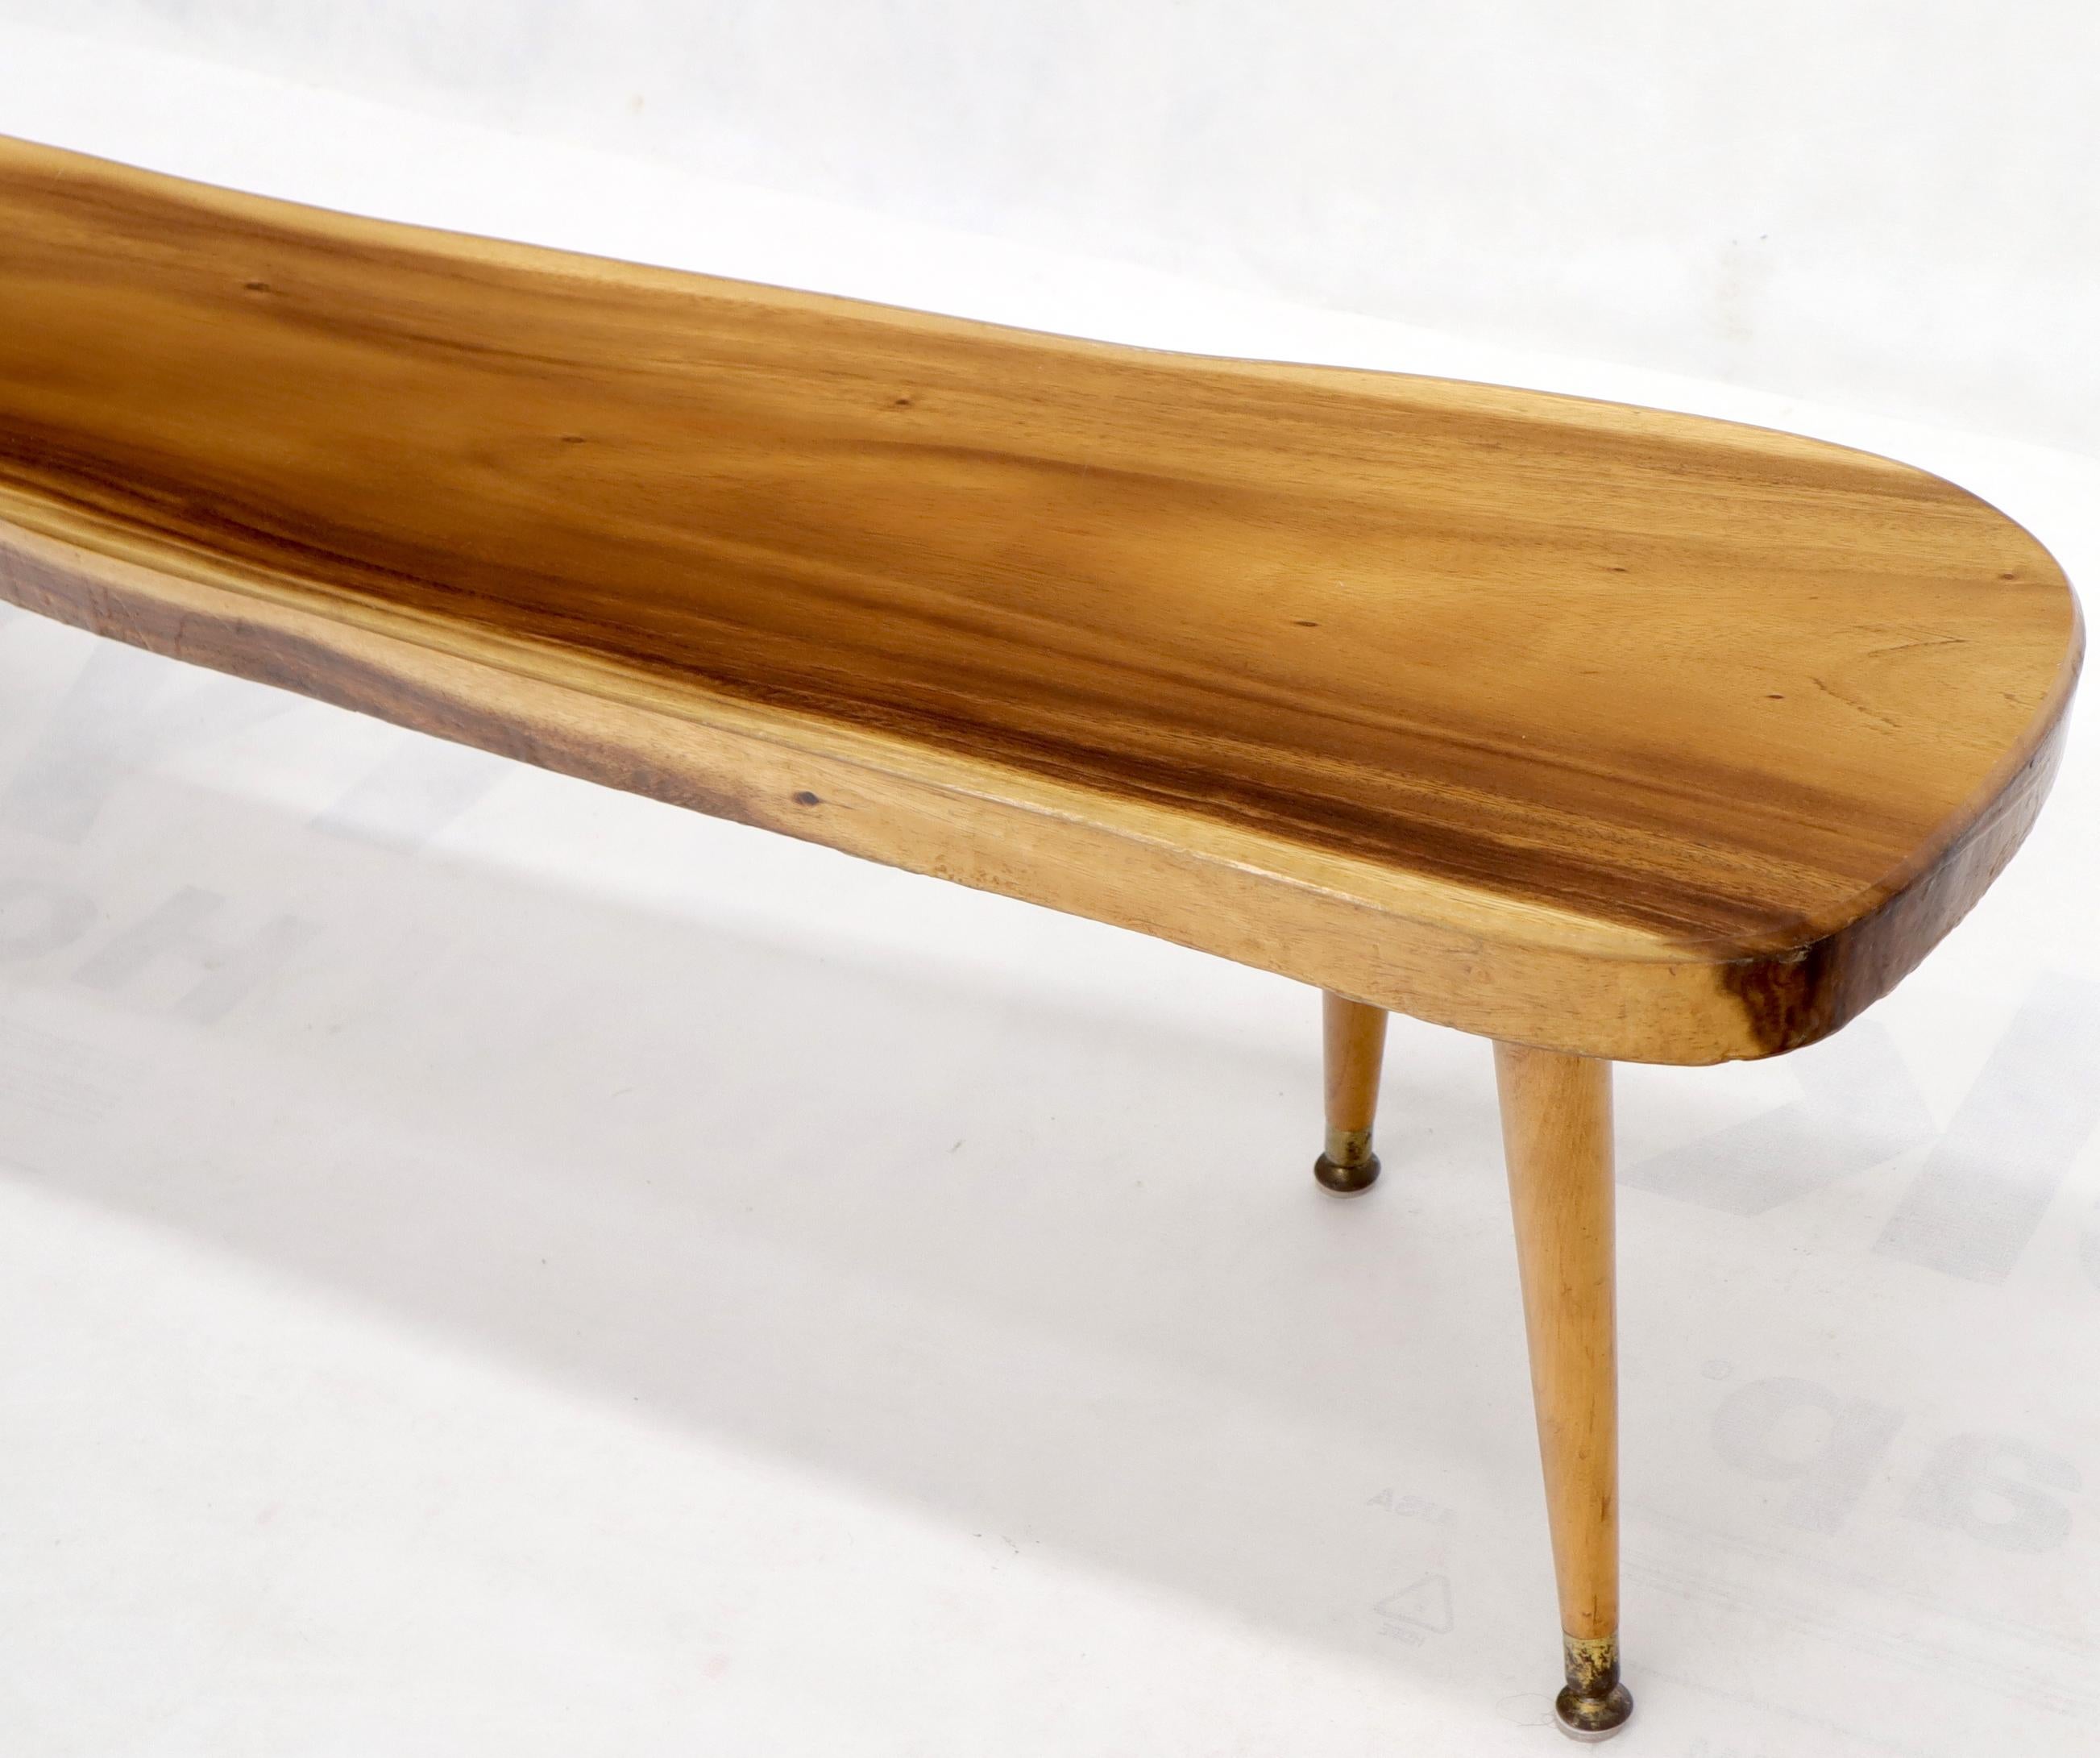 20th Century Live Edge Elongated Organic Shape Coffee Table Bench For Sale